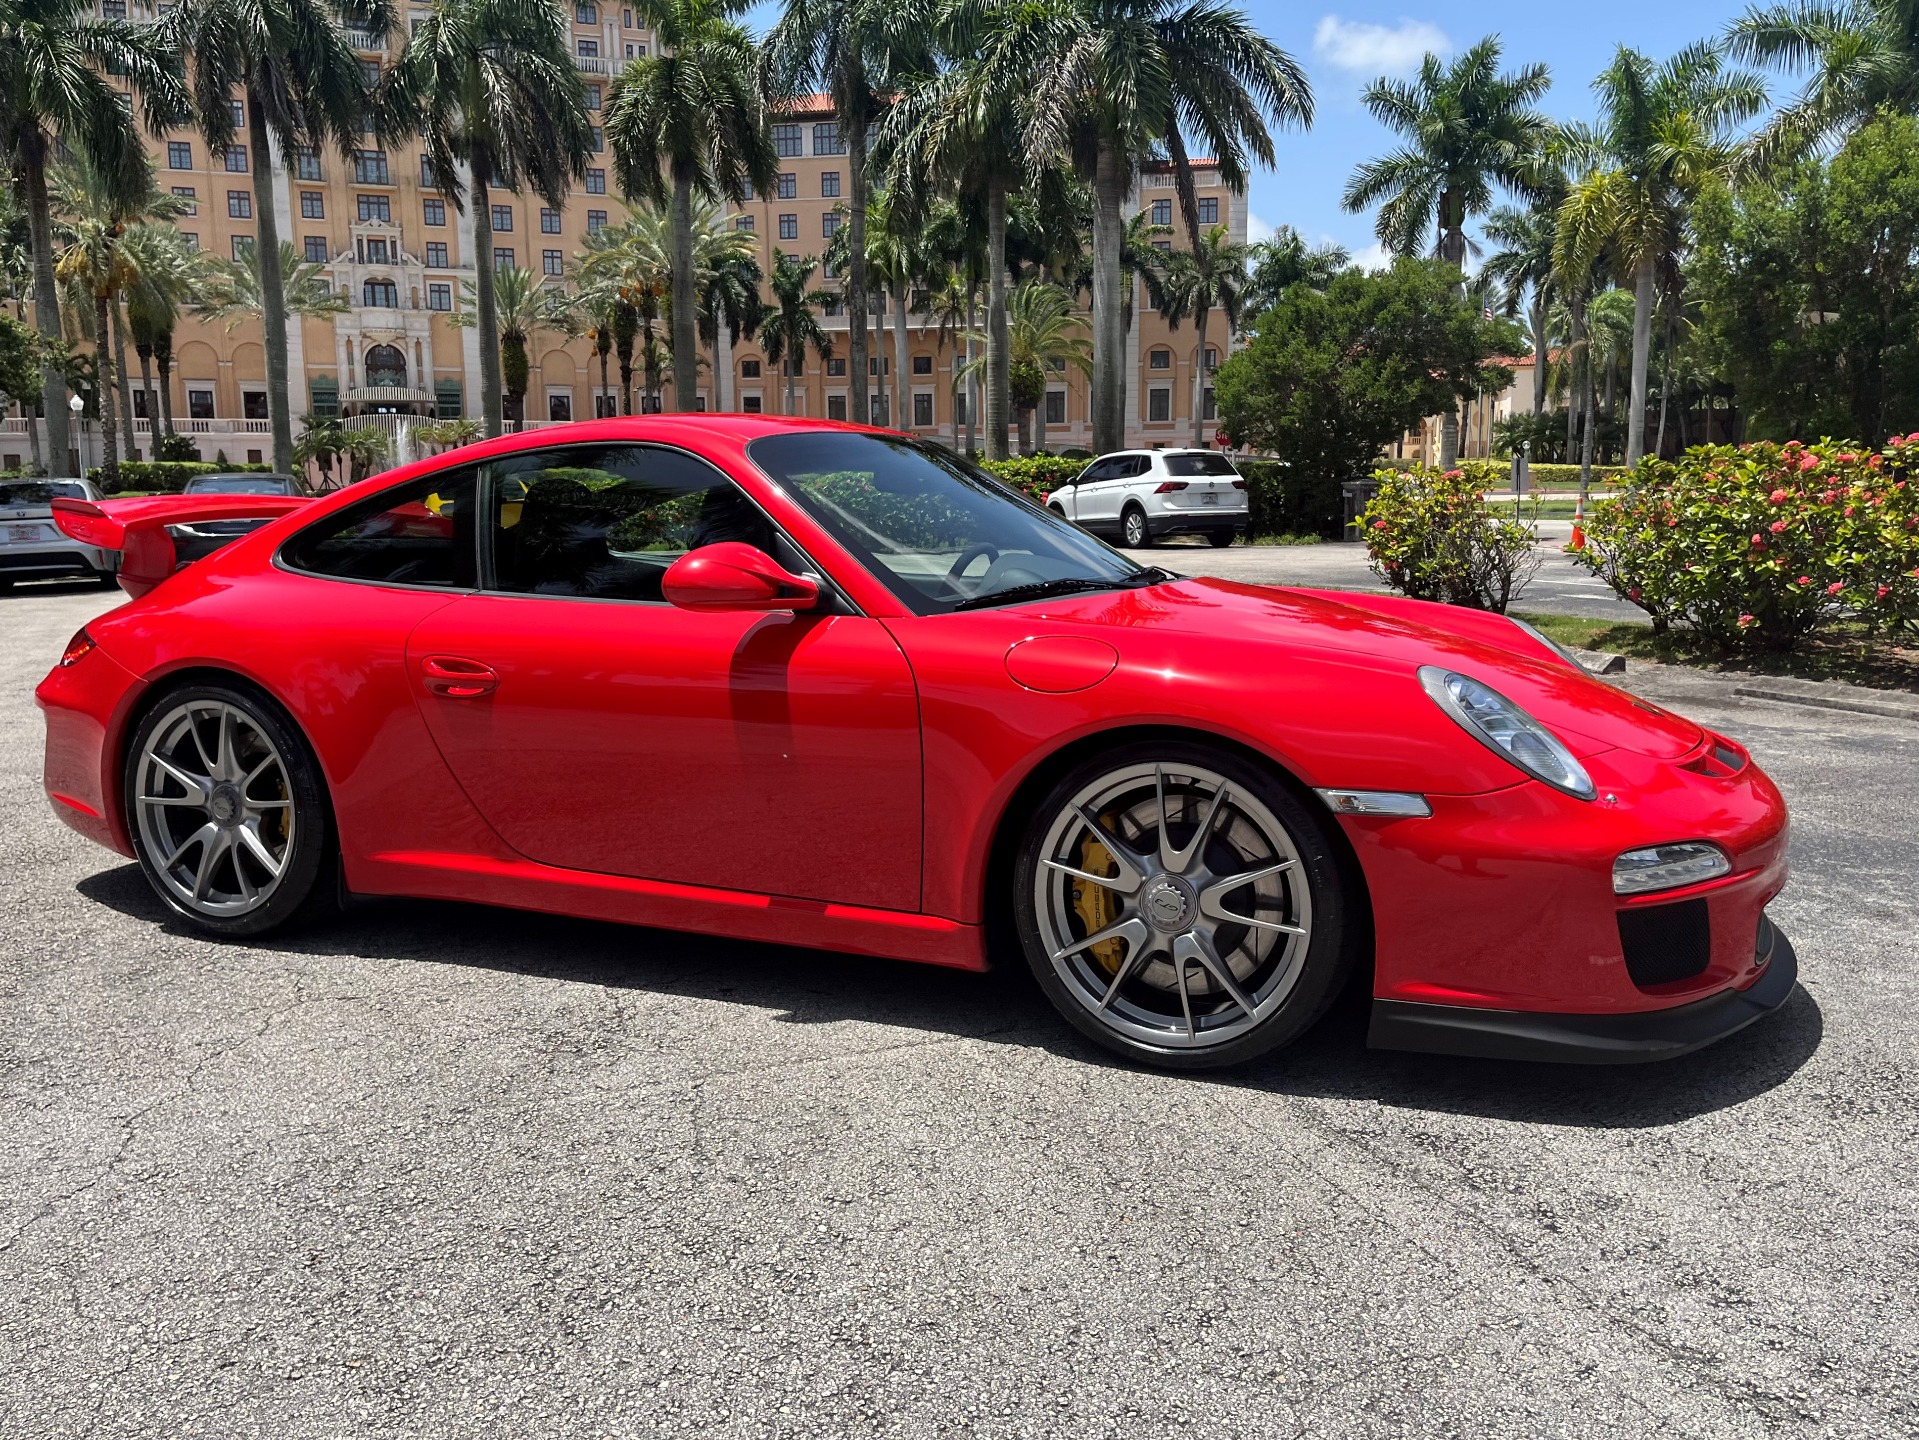 Used 2010 Porsche 911 GT3 for sale $179,850 at The Gables Sports Cars in Miami FL 33146 4